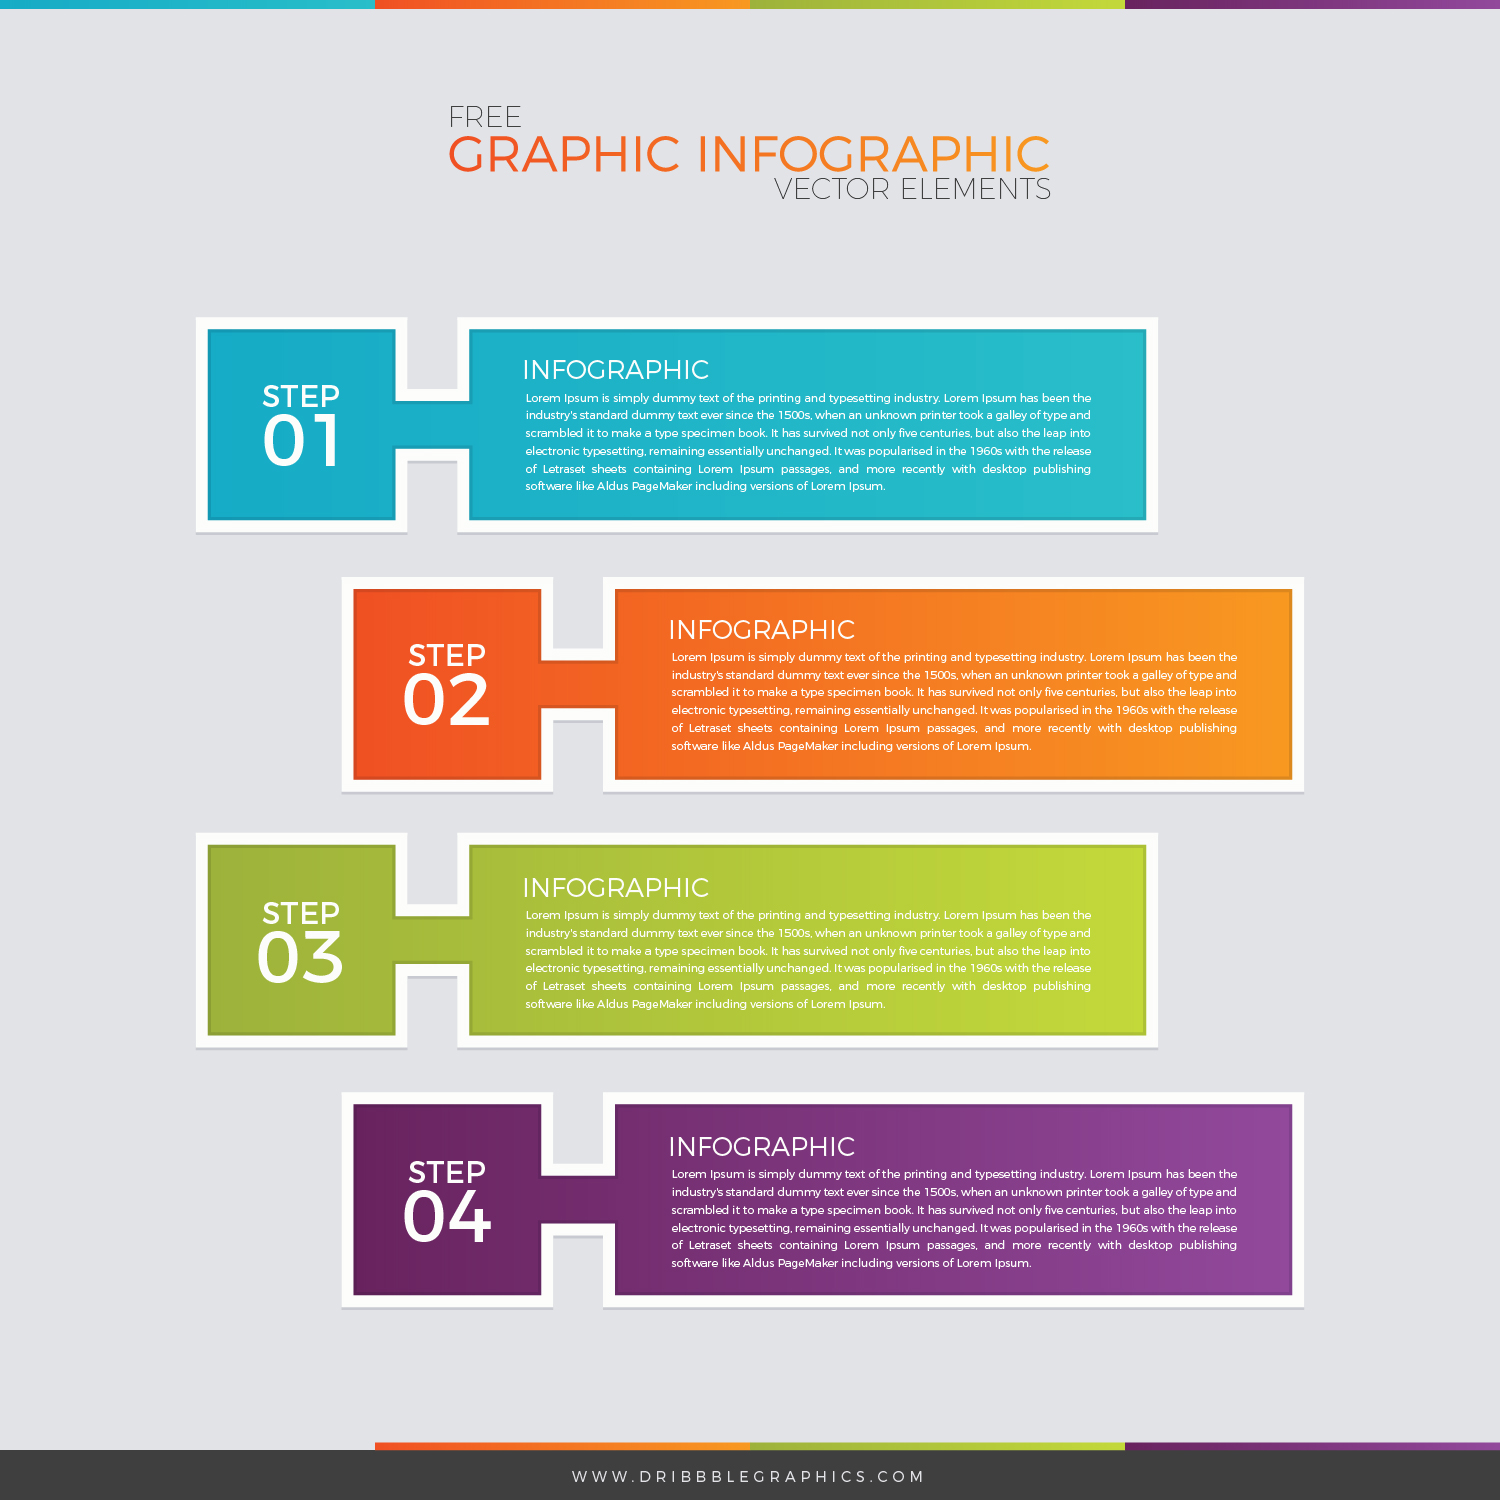 Free Graphic Infographic Vector Elements-02